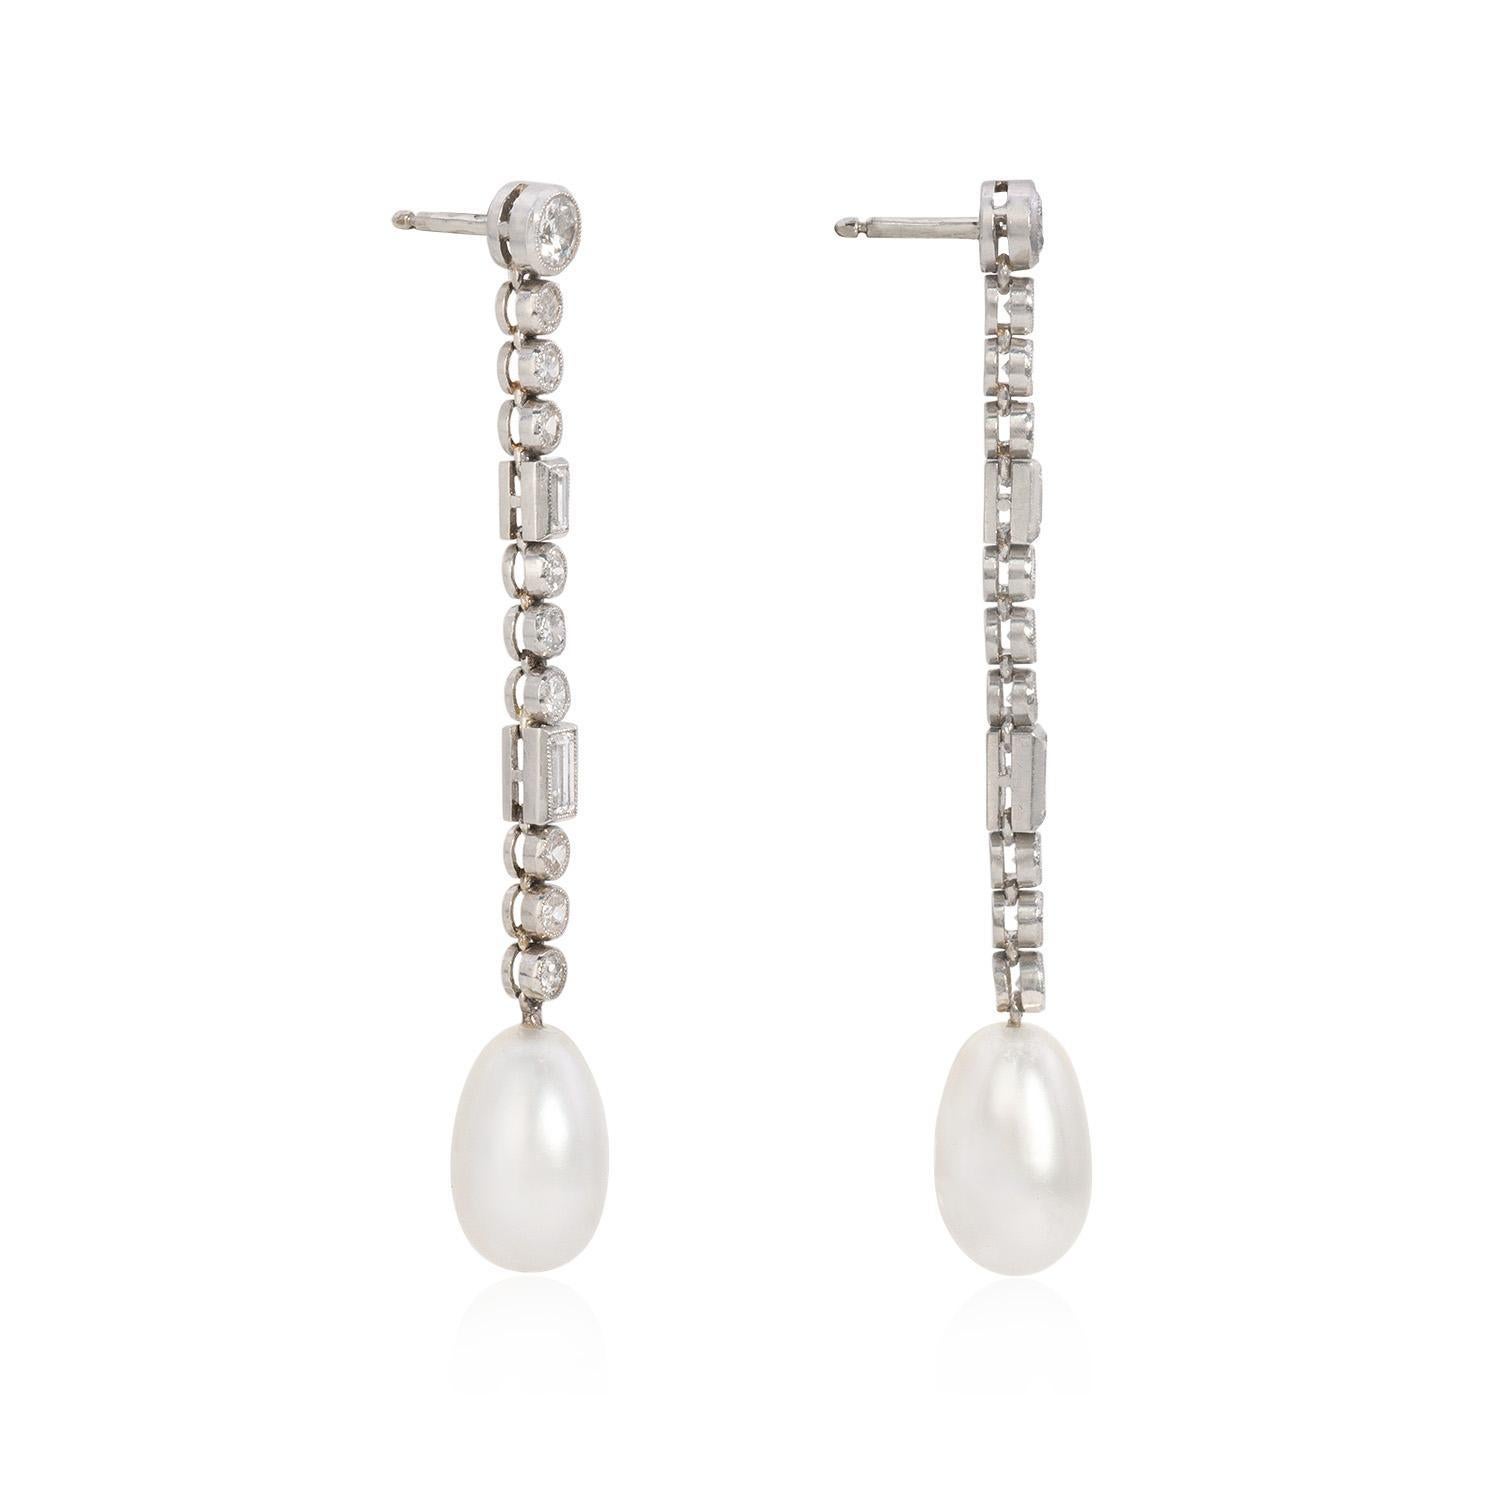 Wrapping up the elegant design of these Natural Art Deco Saltwater Pearl Earrings. 

Crafted with meticulous attention to detail, these earrings showcase a stunning natural pearl measuring 13.8mm by 8.5mm, gracefully suspended from the earlobe. The